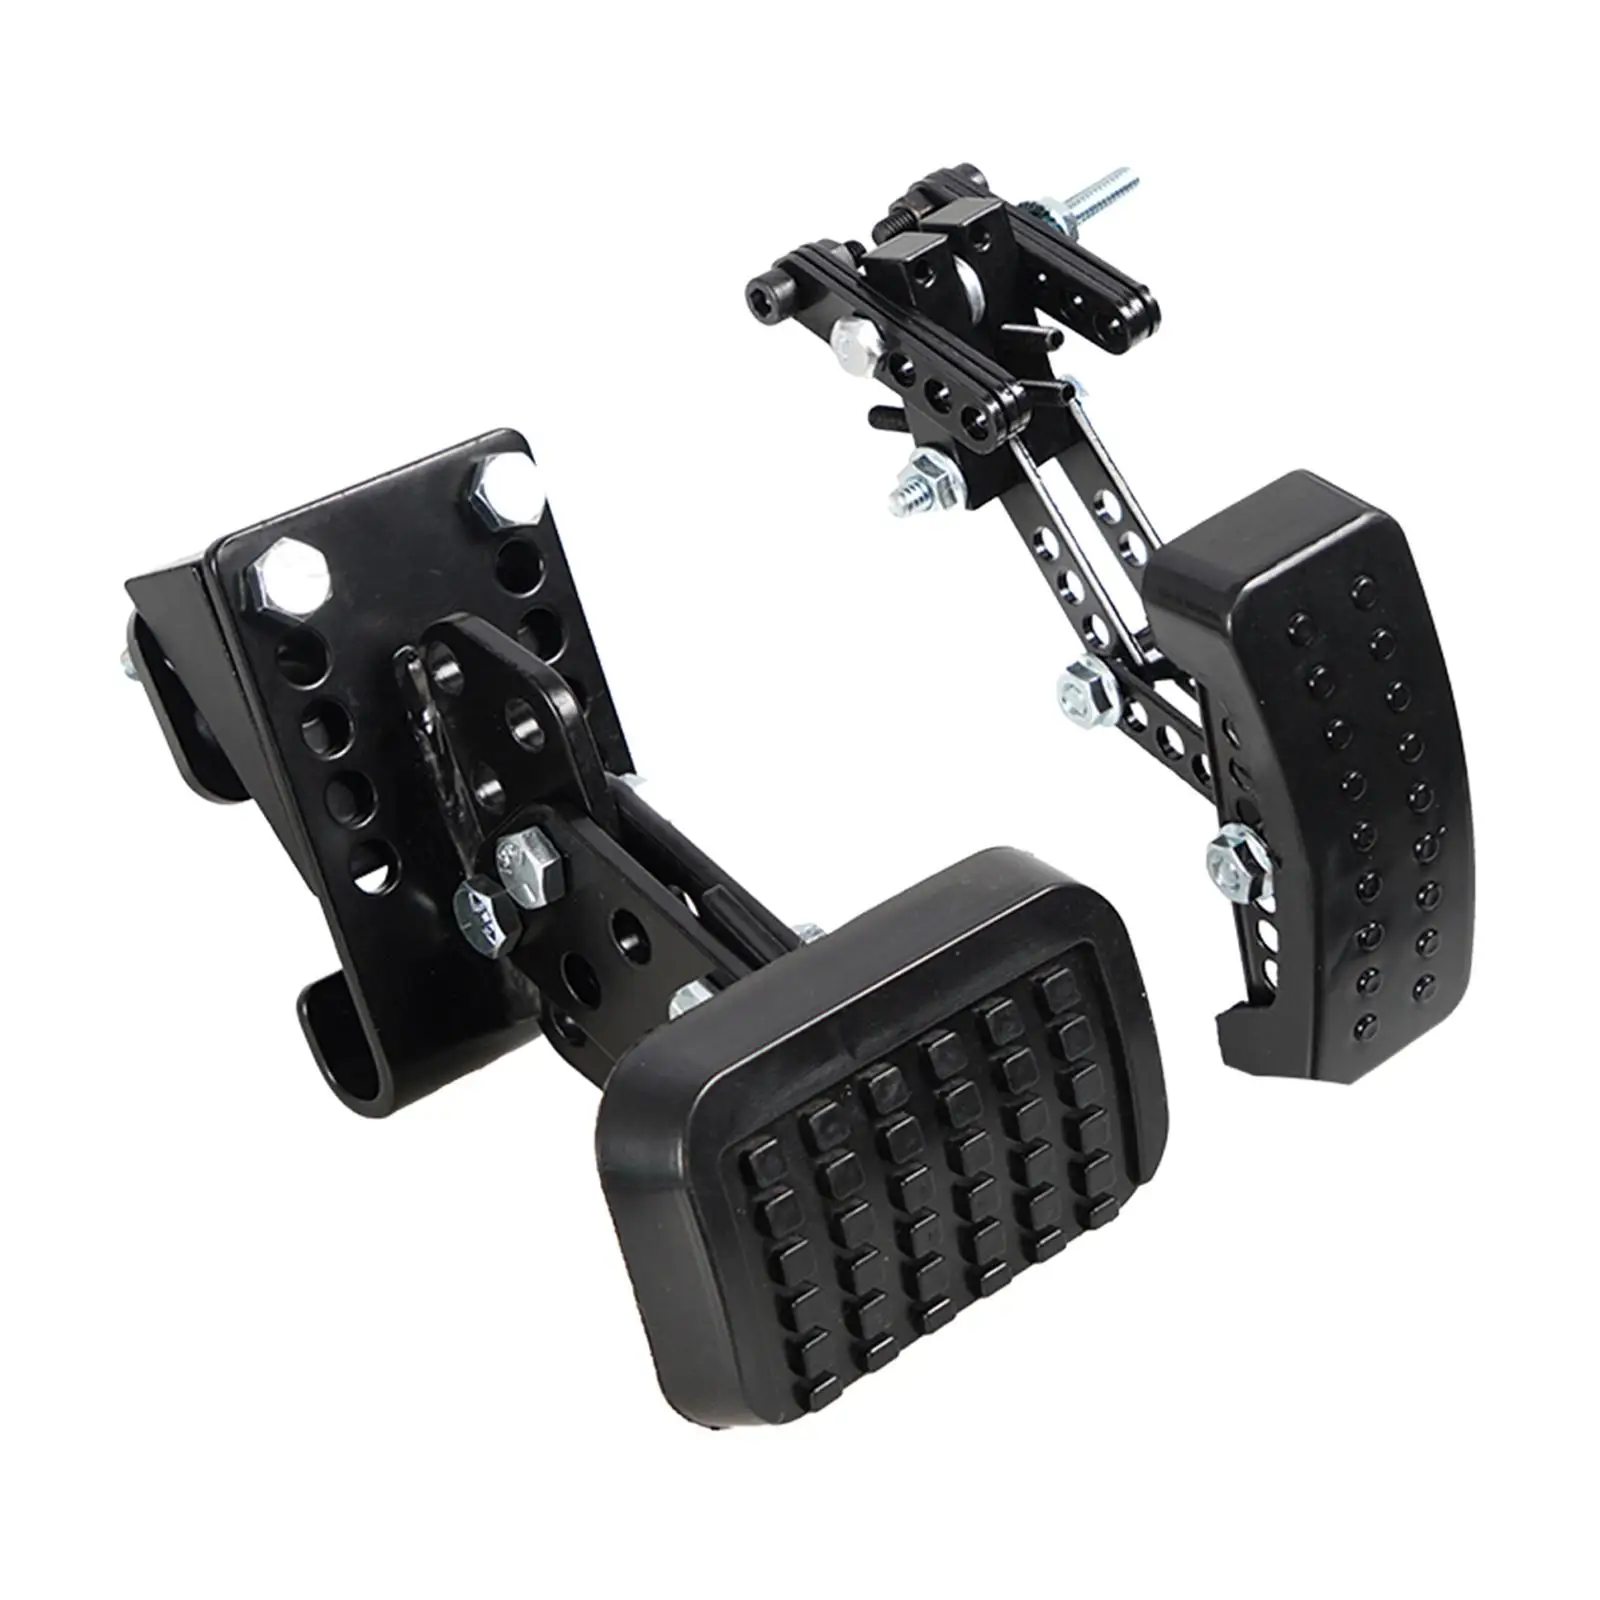 Brake and Pedals Extender Pedal Extension Enlarge Pedal Assembly for Short